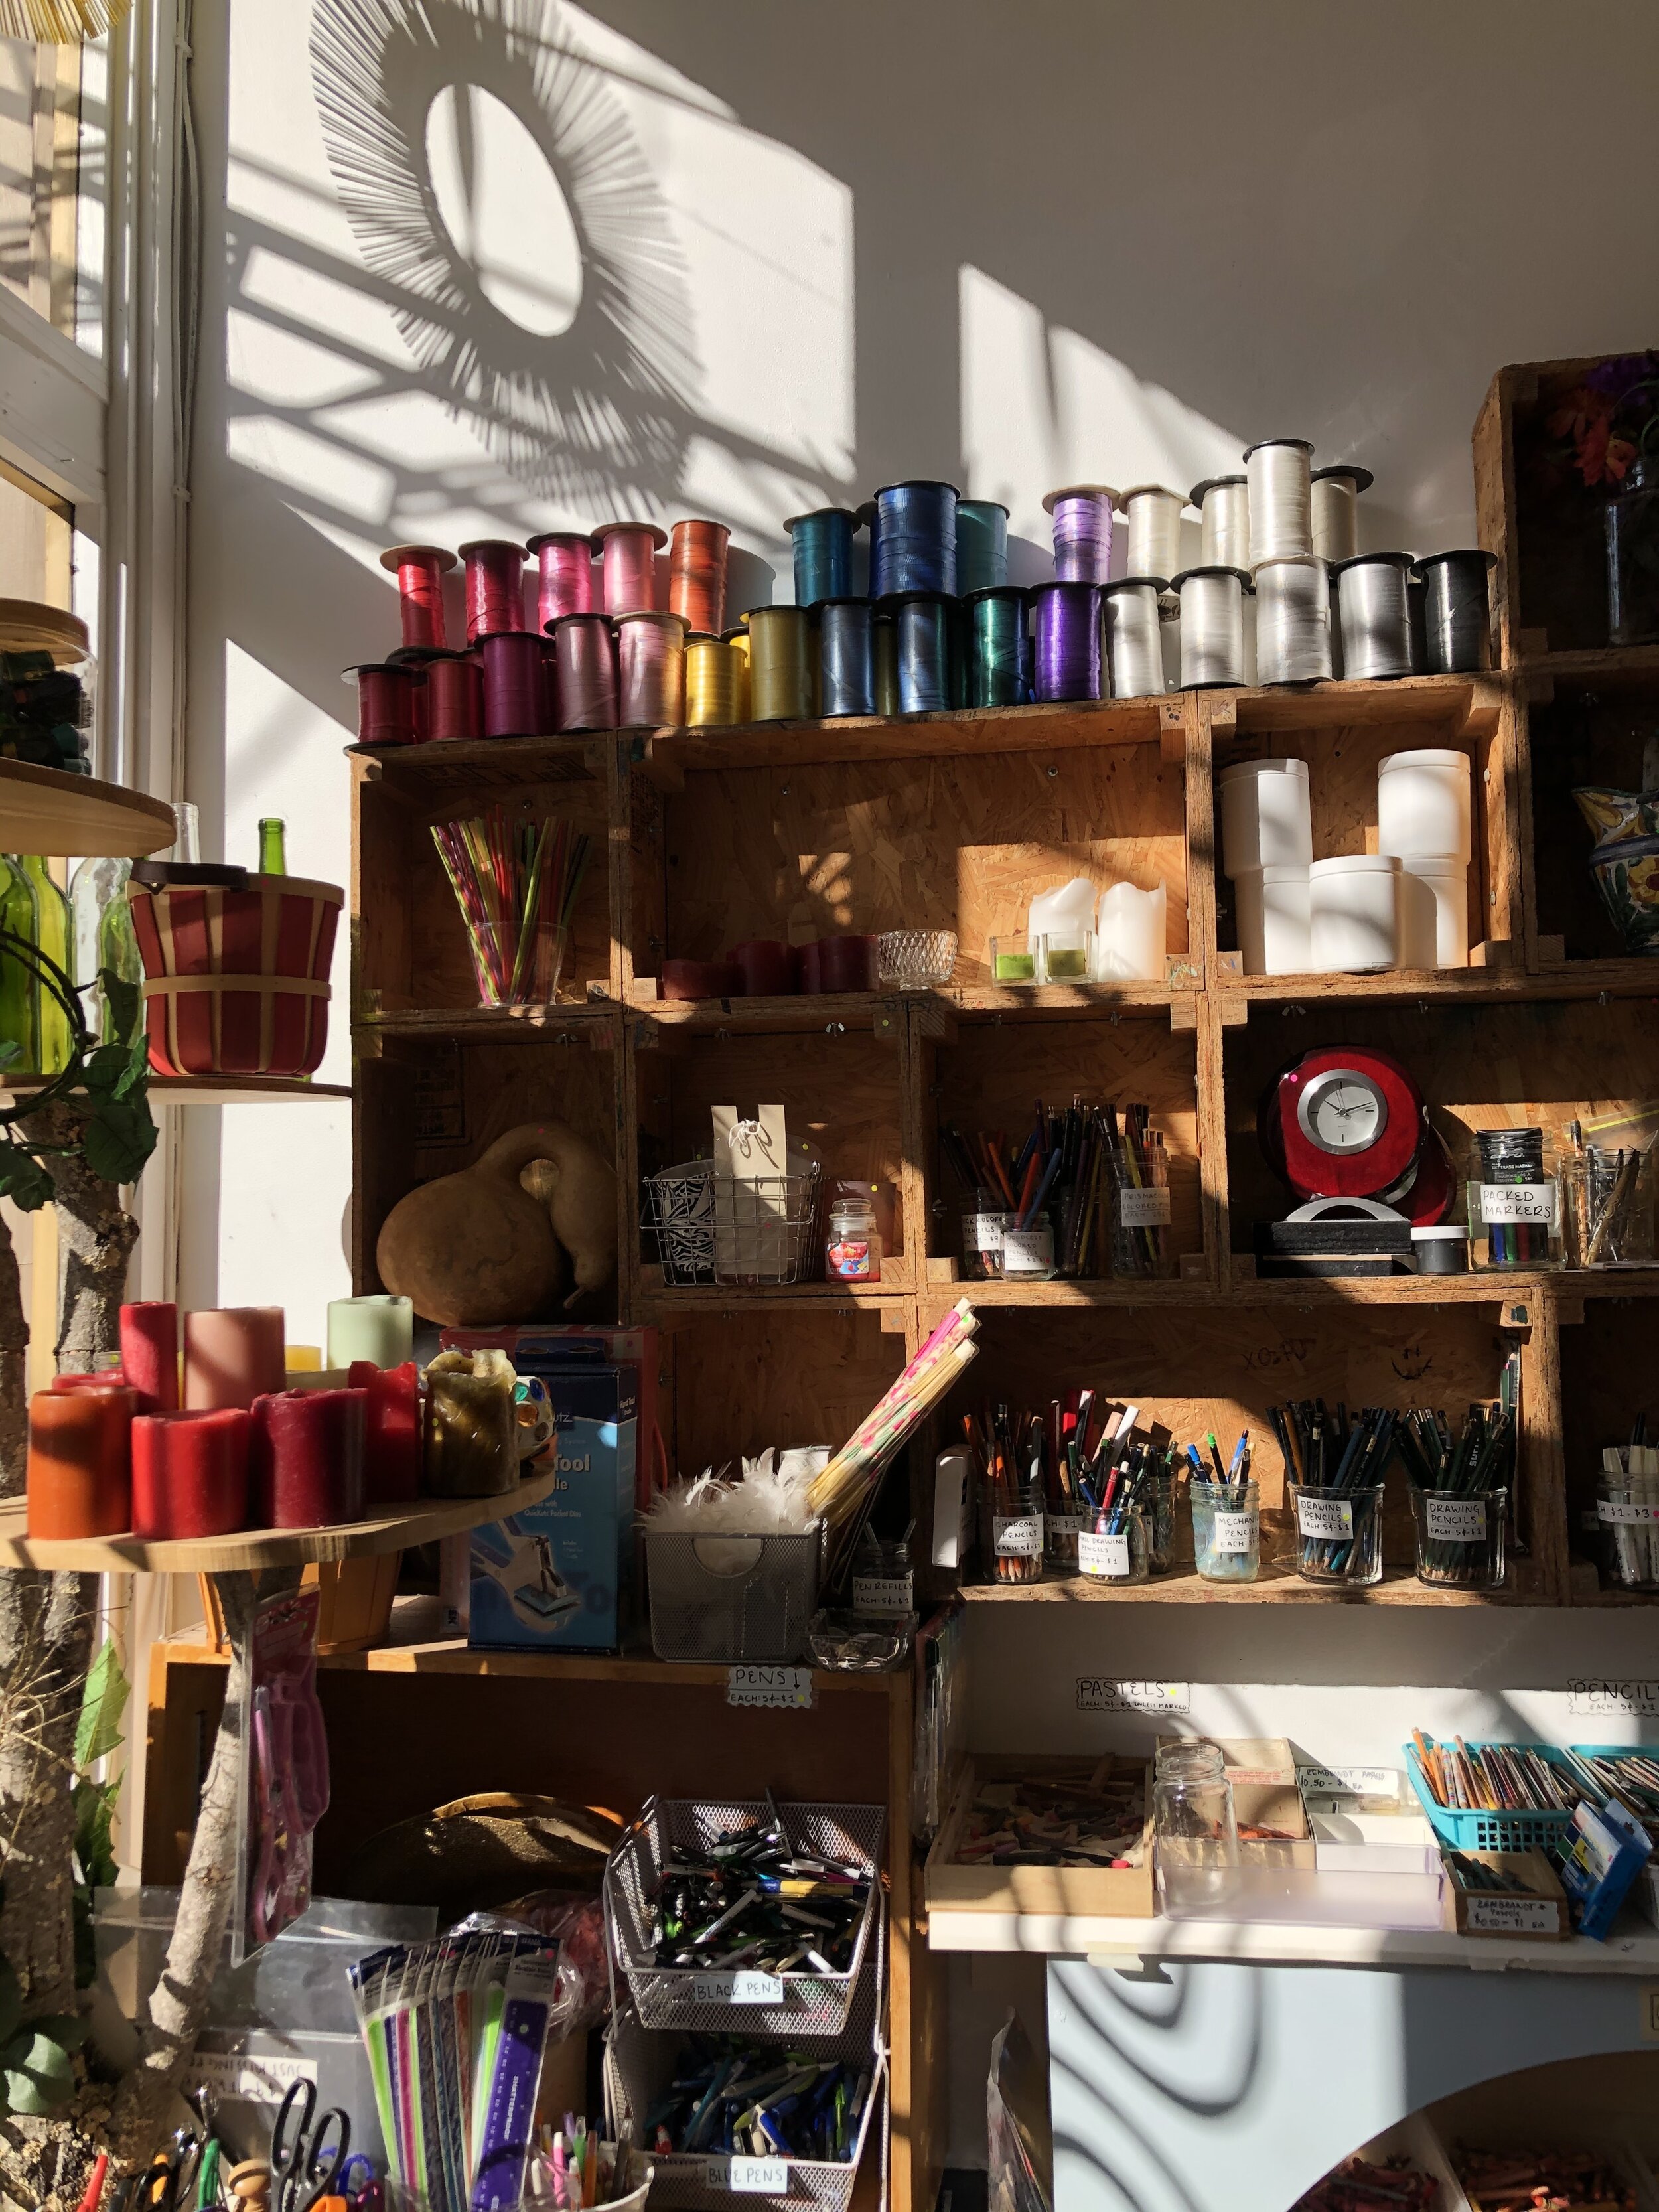 How This Art Supply Thrift Store Supports Creative Reuse